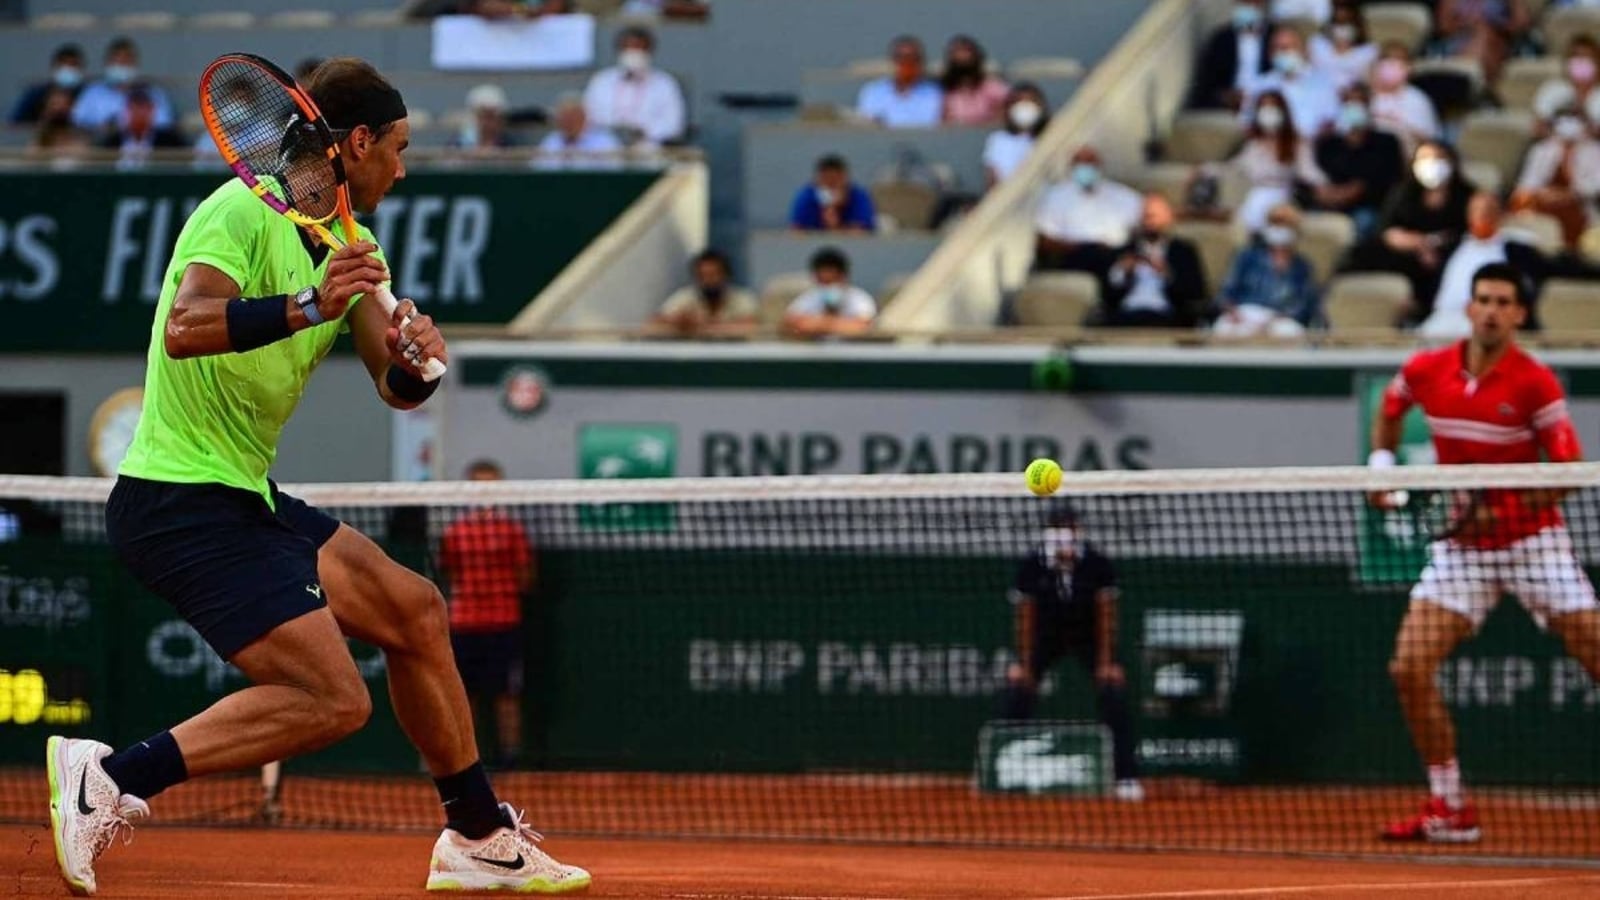 French Open 2022 quarterfinal: What does Nadal need to do to beat Djokovic?